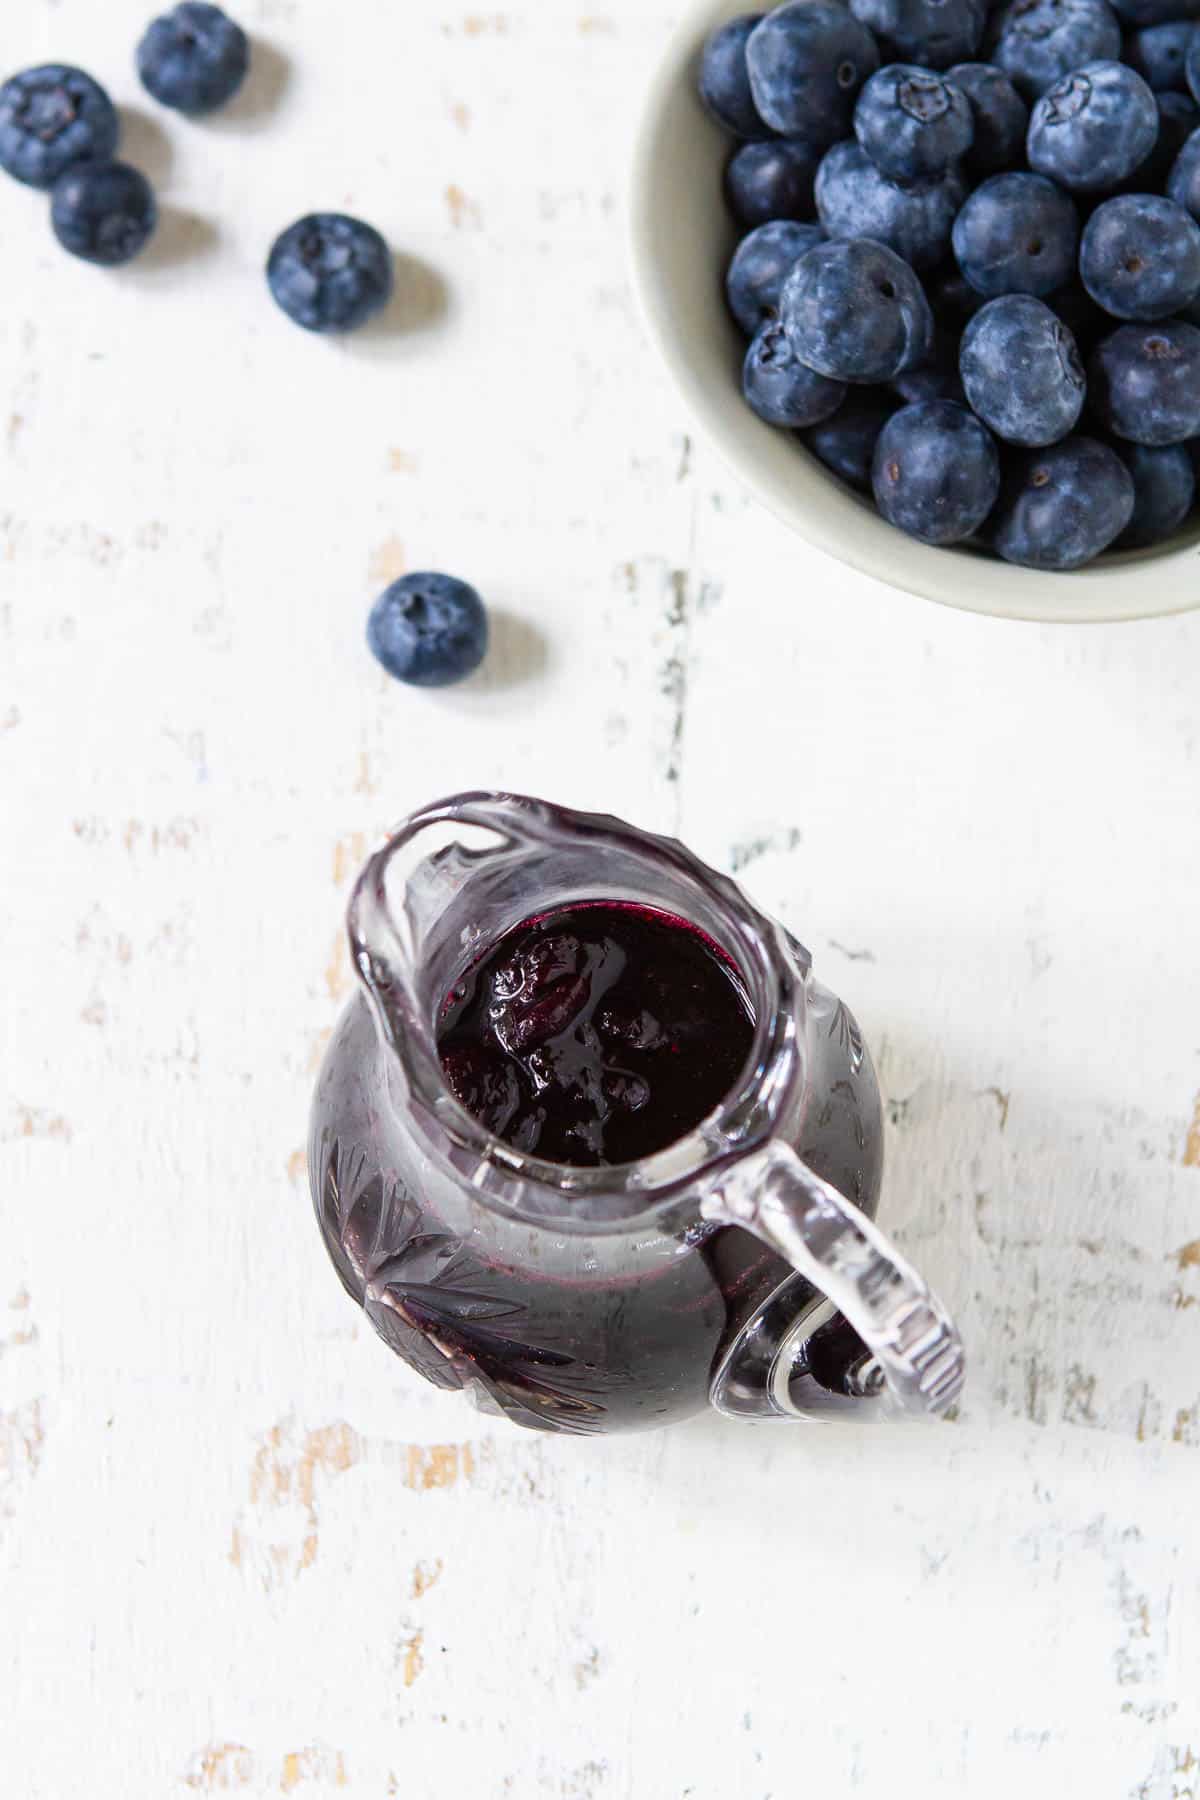 Maple blueberry syrup in a glass pitchers and blueberries in a white bowl.